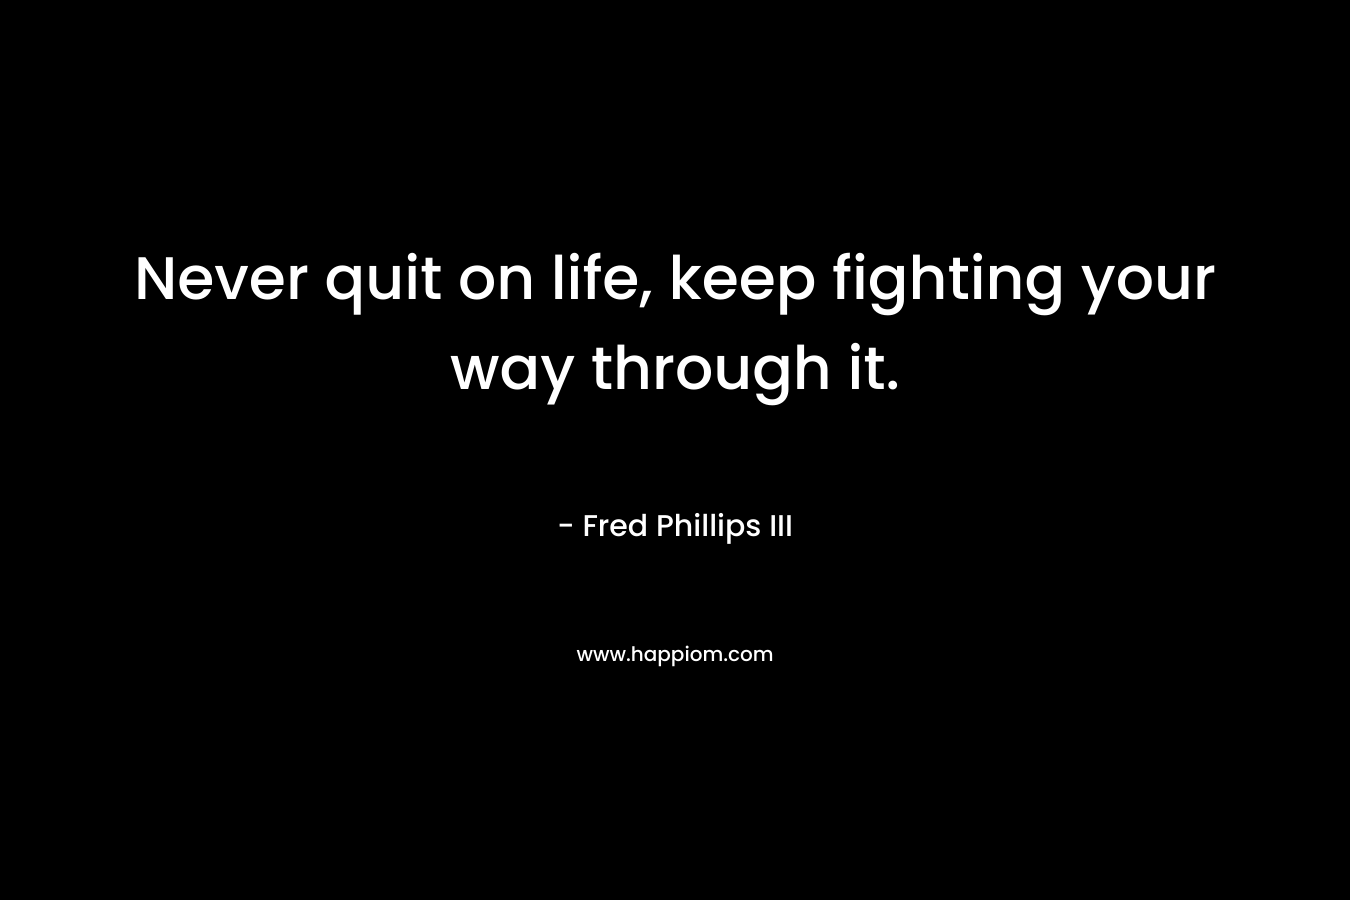 Never quit on life, keep fighting your way through it. – Fred Phillips III